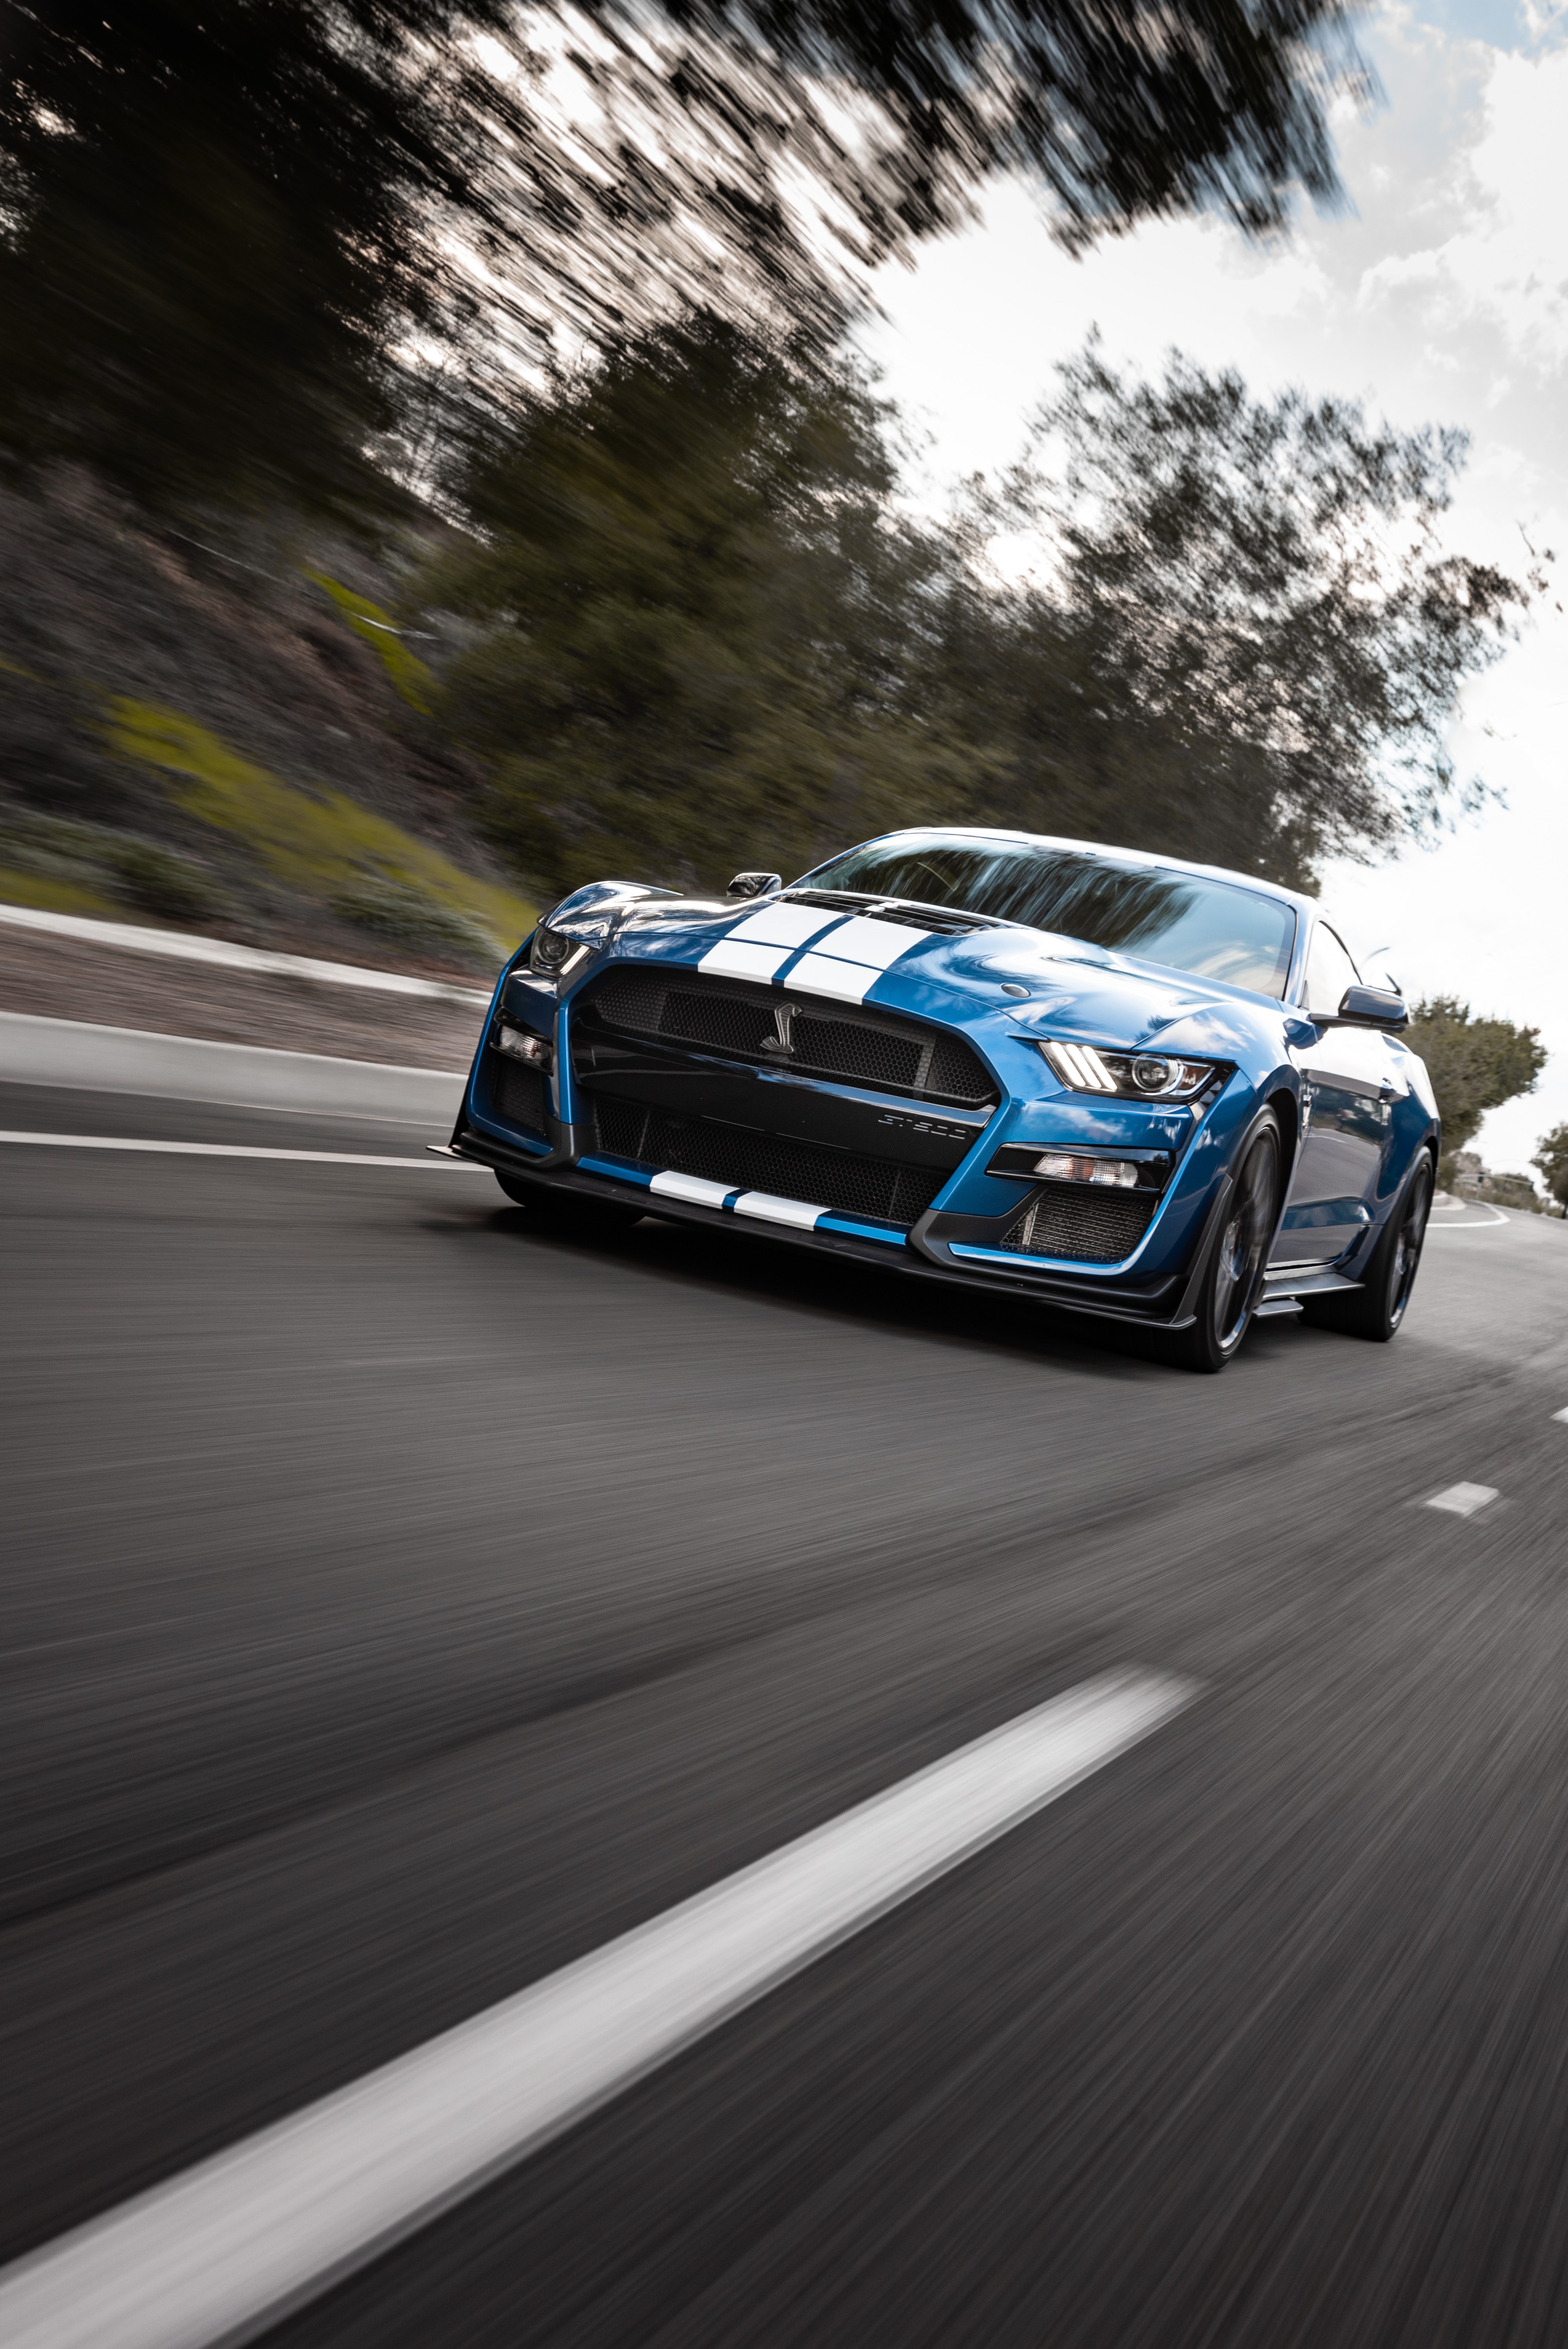 Best Shelby wallpapers for phone screen